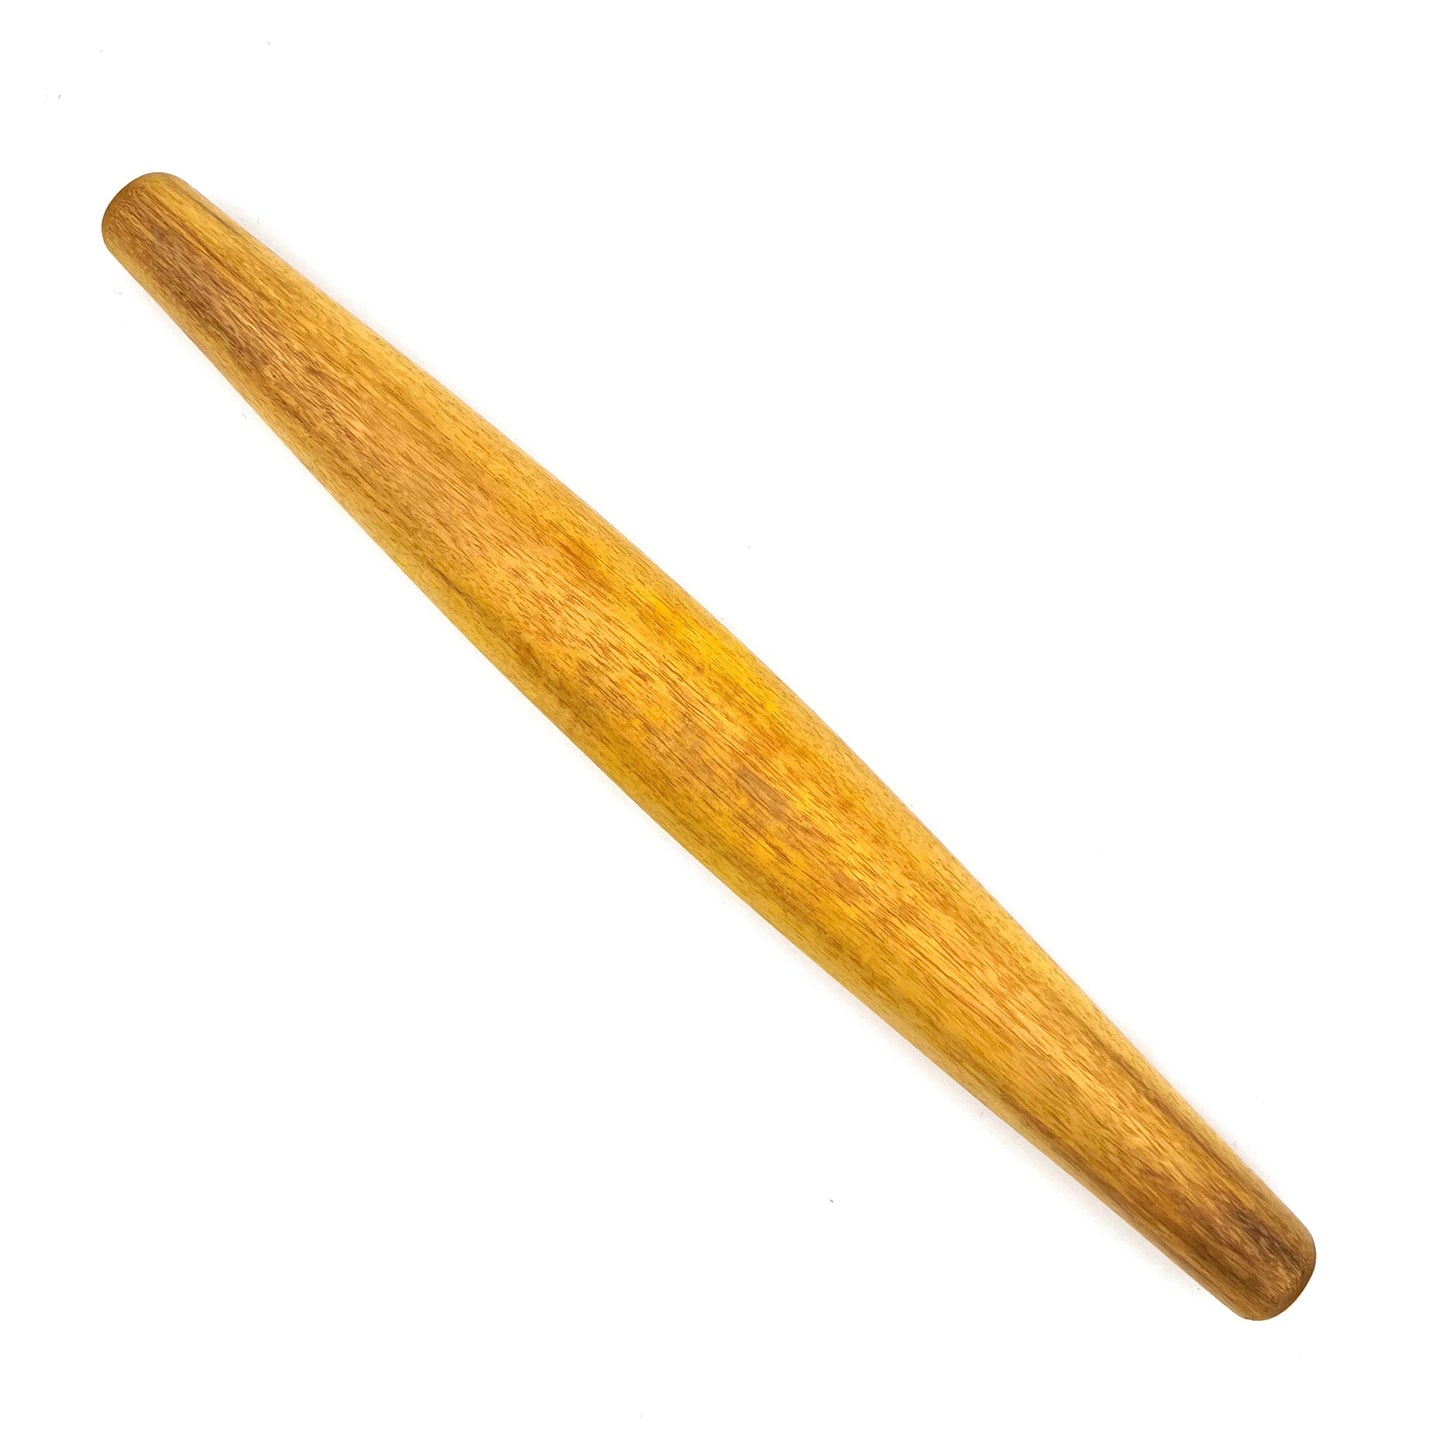 Tropical Hardwood French-style Rolling Pin